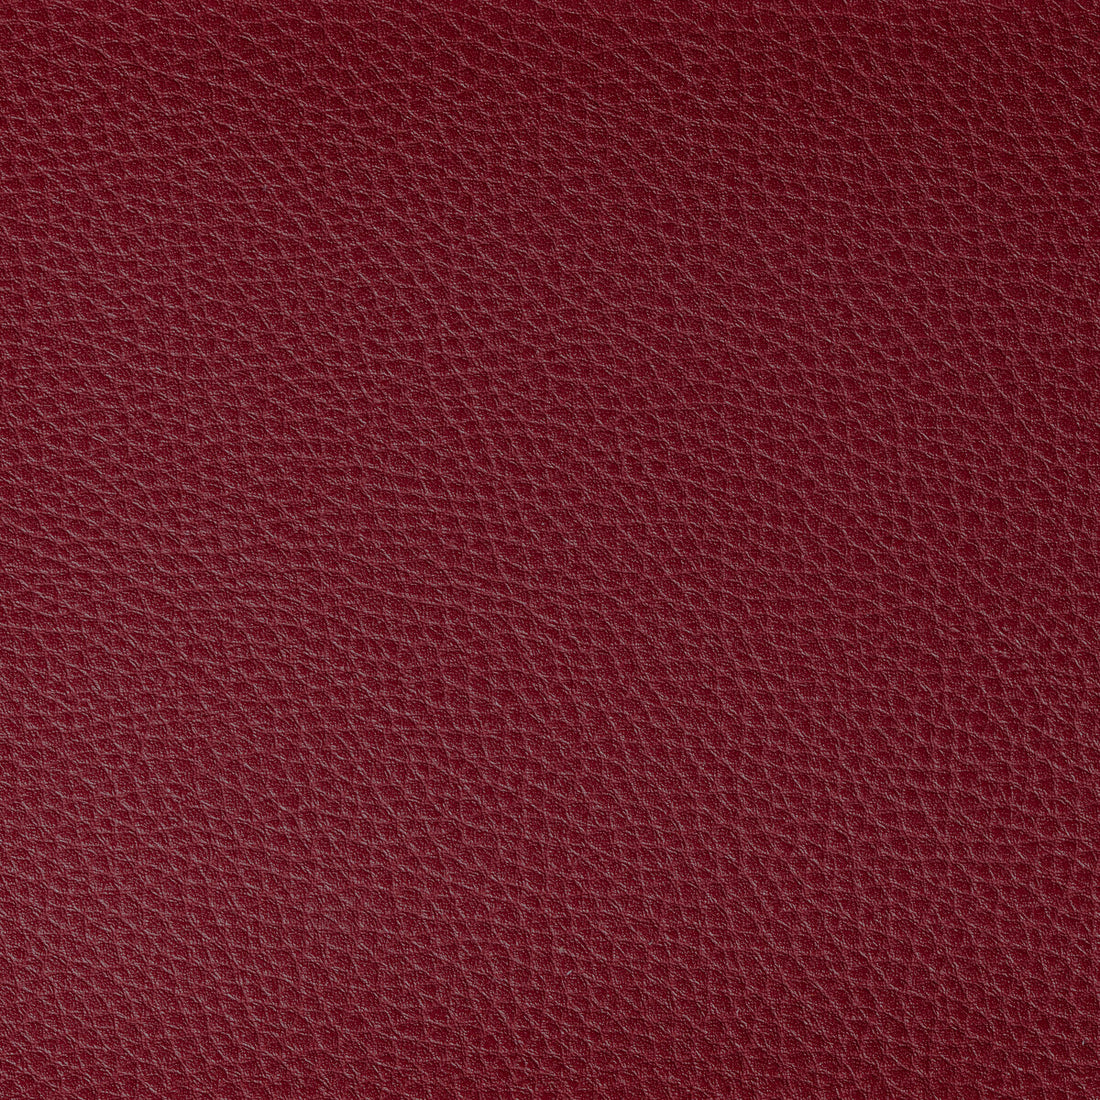 Boone fabric in sangria color - pattern BOONE.19.0 - by Kravet Contract in the Foundations / Value collection